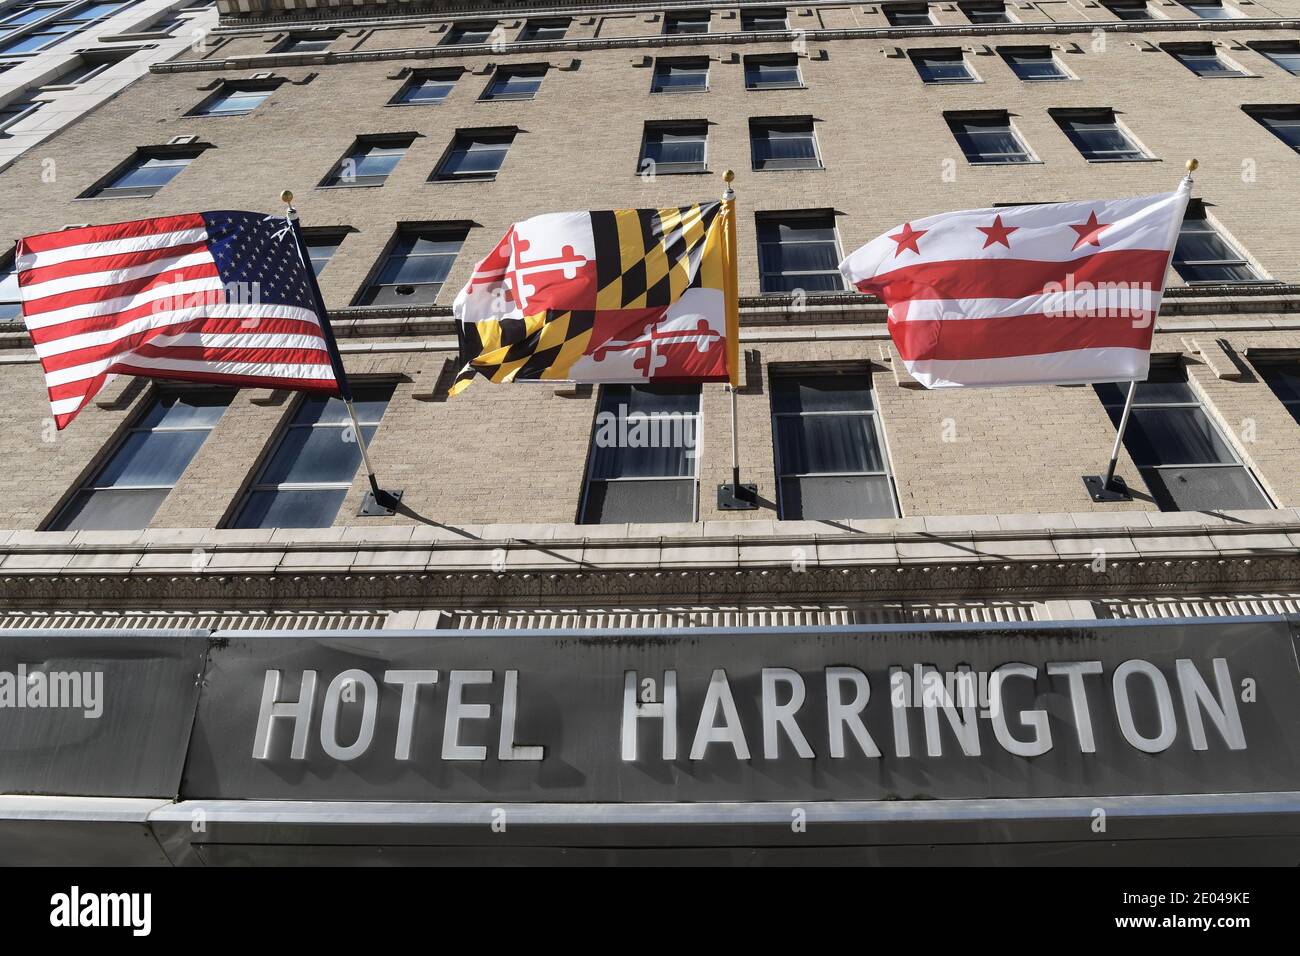 Washington, District of Columbia, USA. 29th Dec, 2020. Hotel Harrington  where Proud Boys members will gathering for January 6, 2021 protest of Joe  BidenÃ•s election as president, today on December 29, 2020